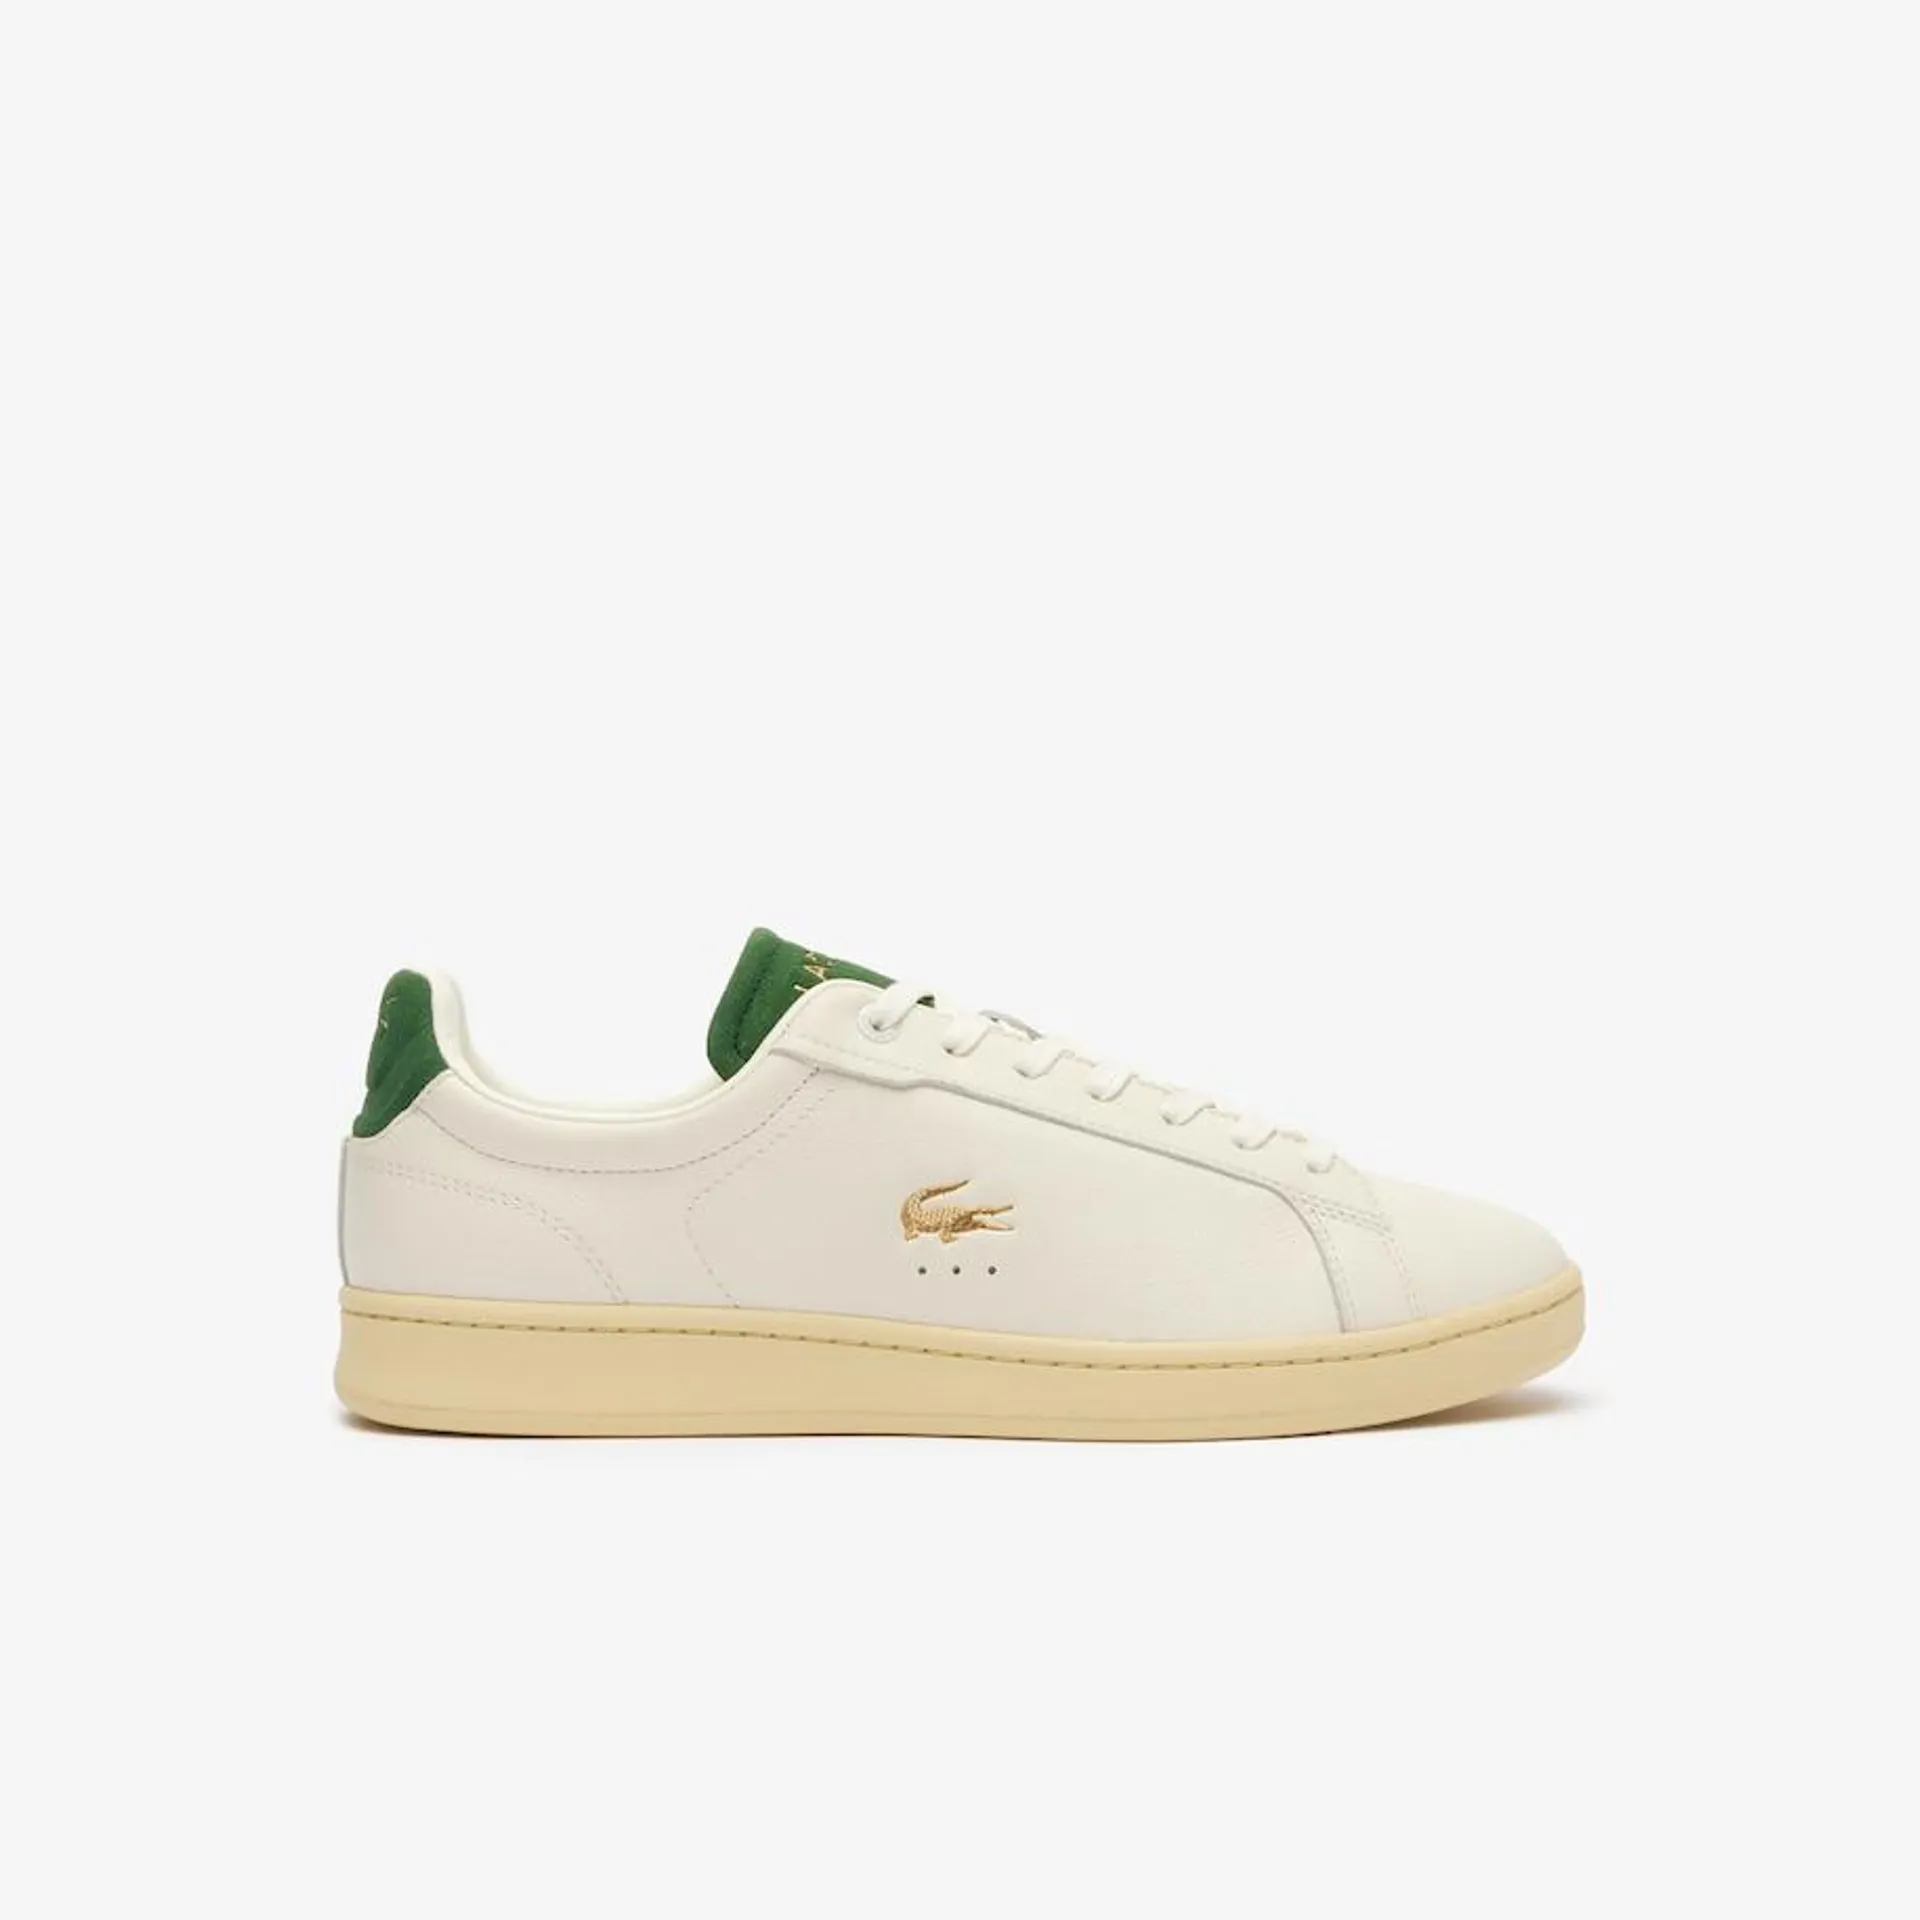 Men's Carnaby Pro Leather Trainers